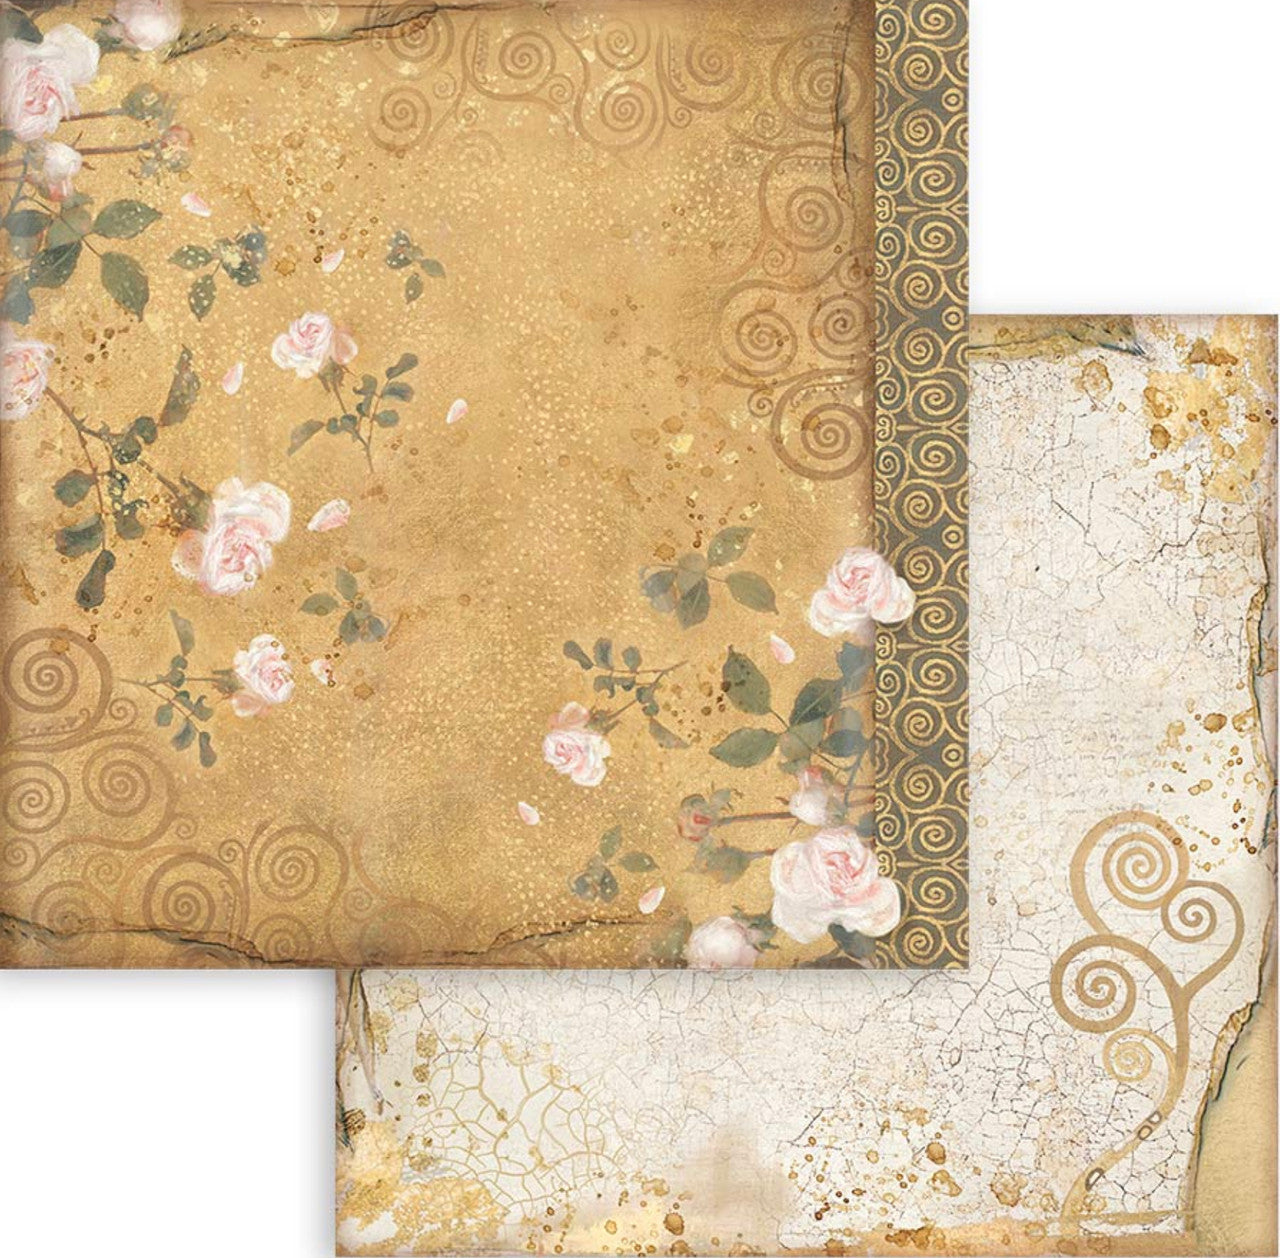 Stamperia (12"x12") Double Face Background Paper Pack -  Klimt